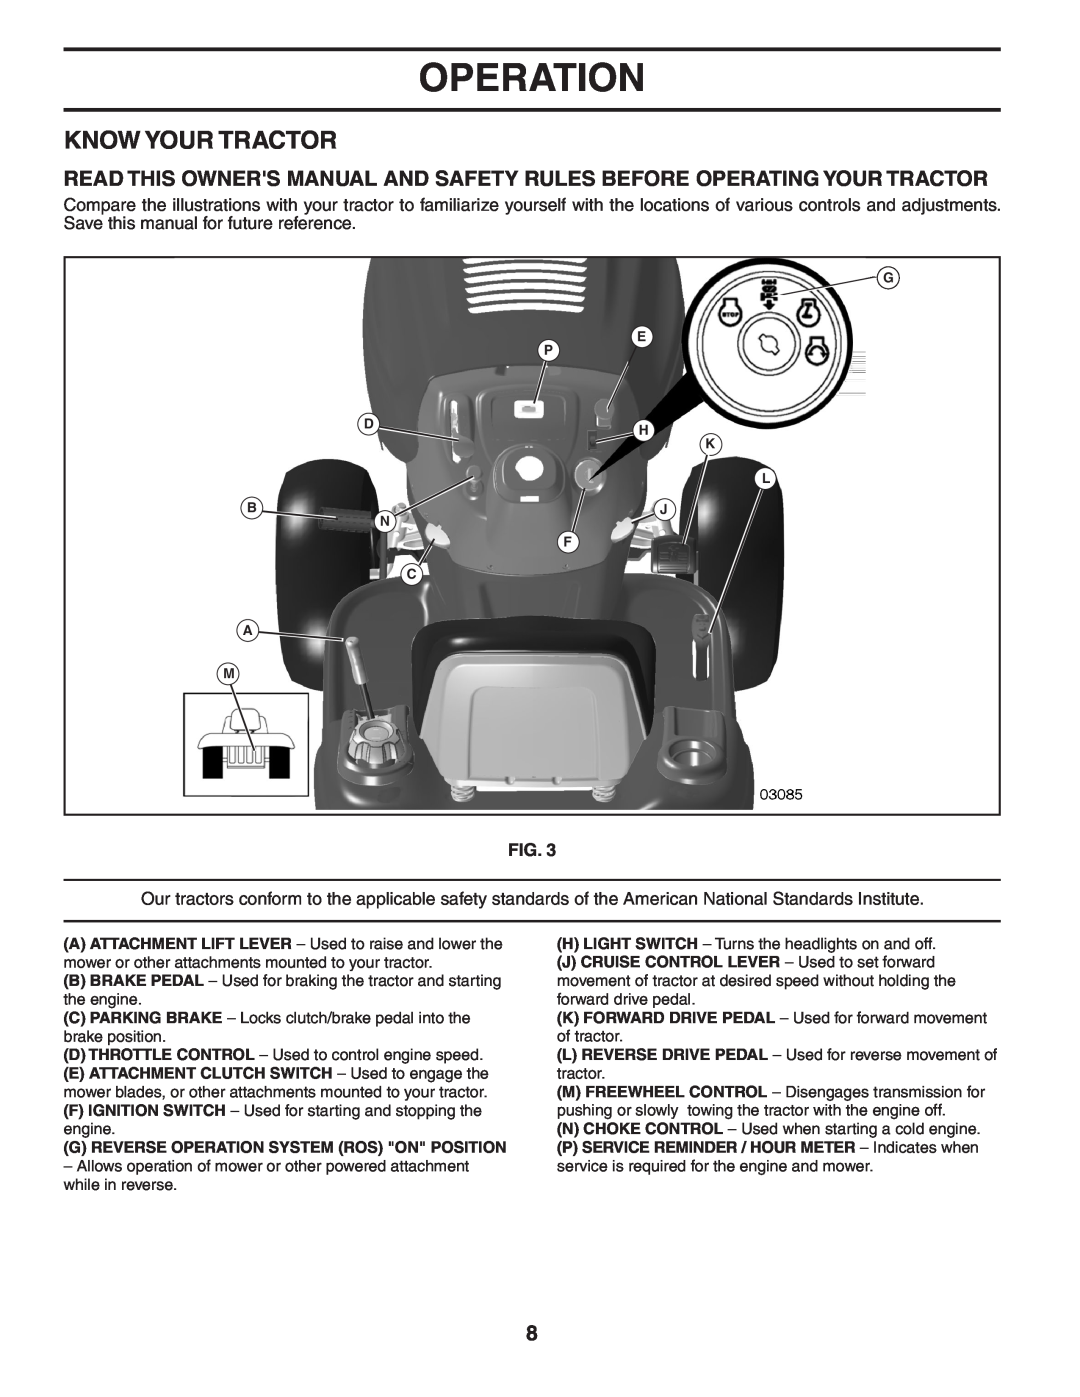 Poulan XT22H48YT manual Know Your Tractor, G Reverse Operation System Ros On Position 